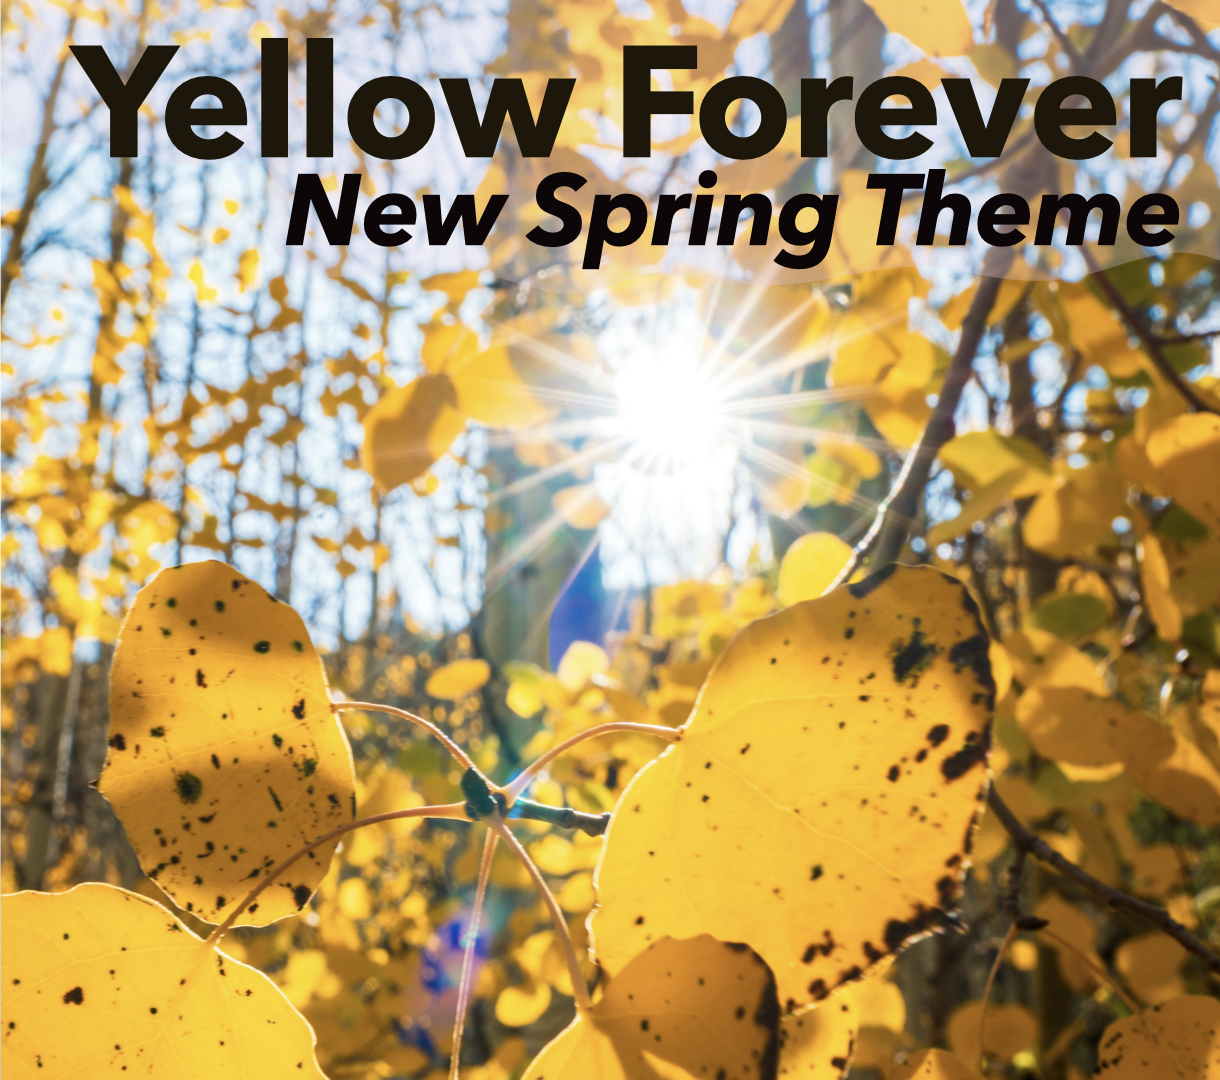 New Spring Theme: Yellow Forever